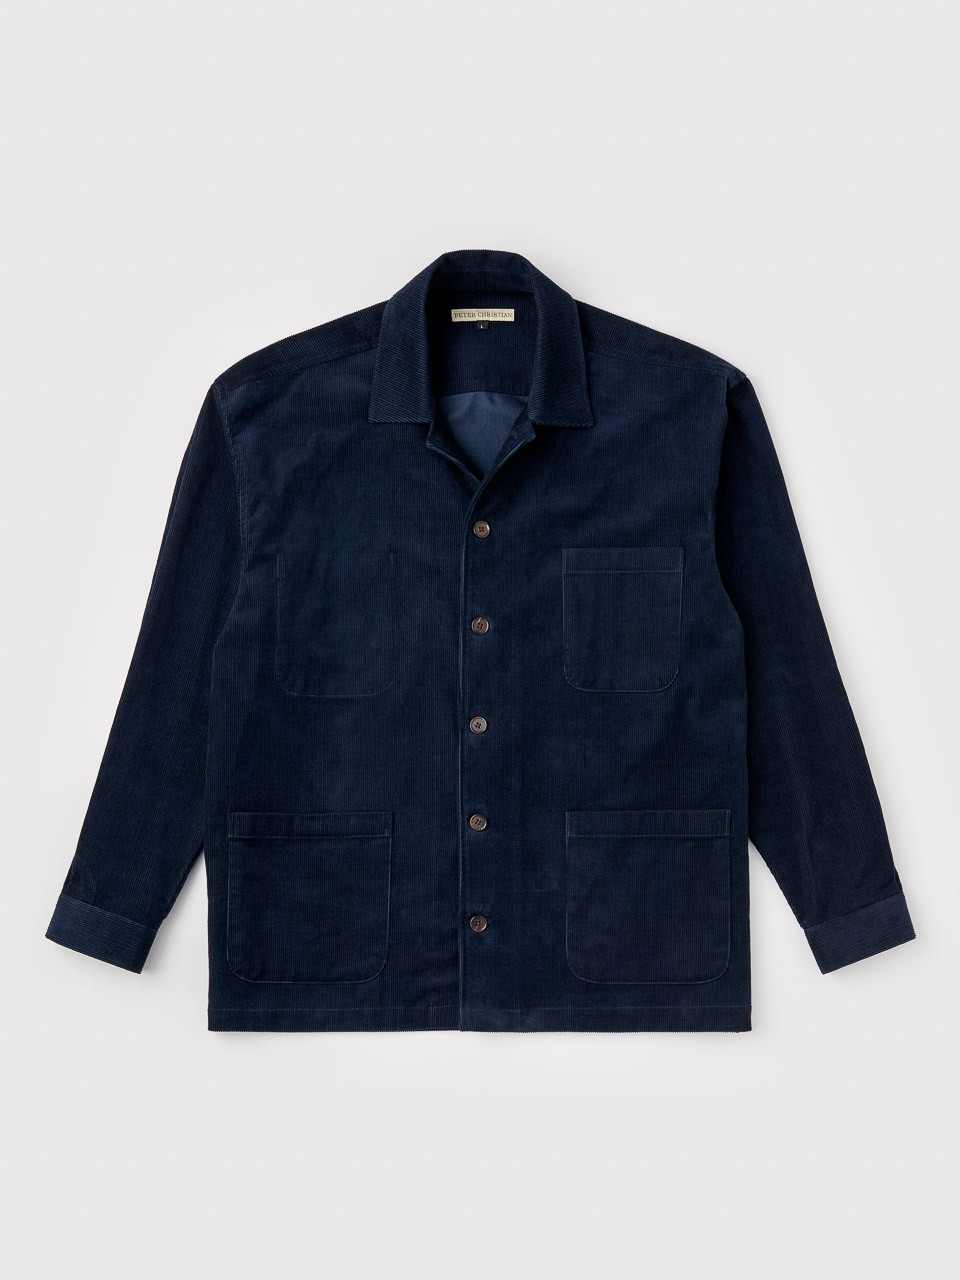 Navy Blue Corduroy Button Down by Tilley Endurables Made in Canada